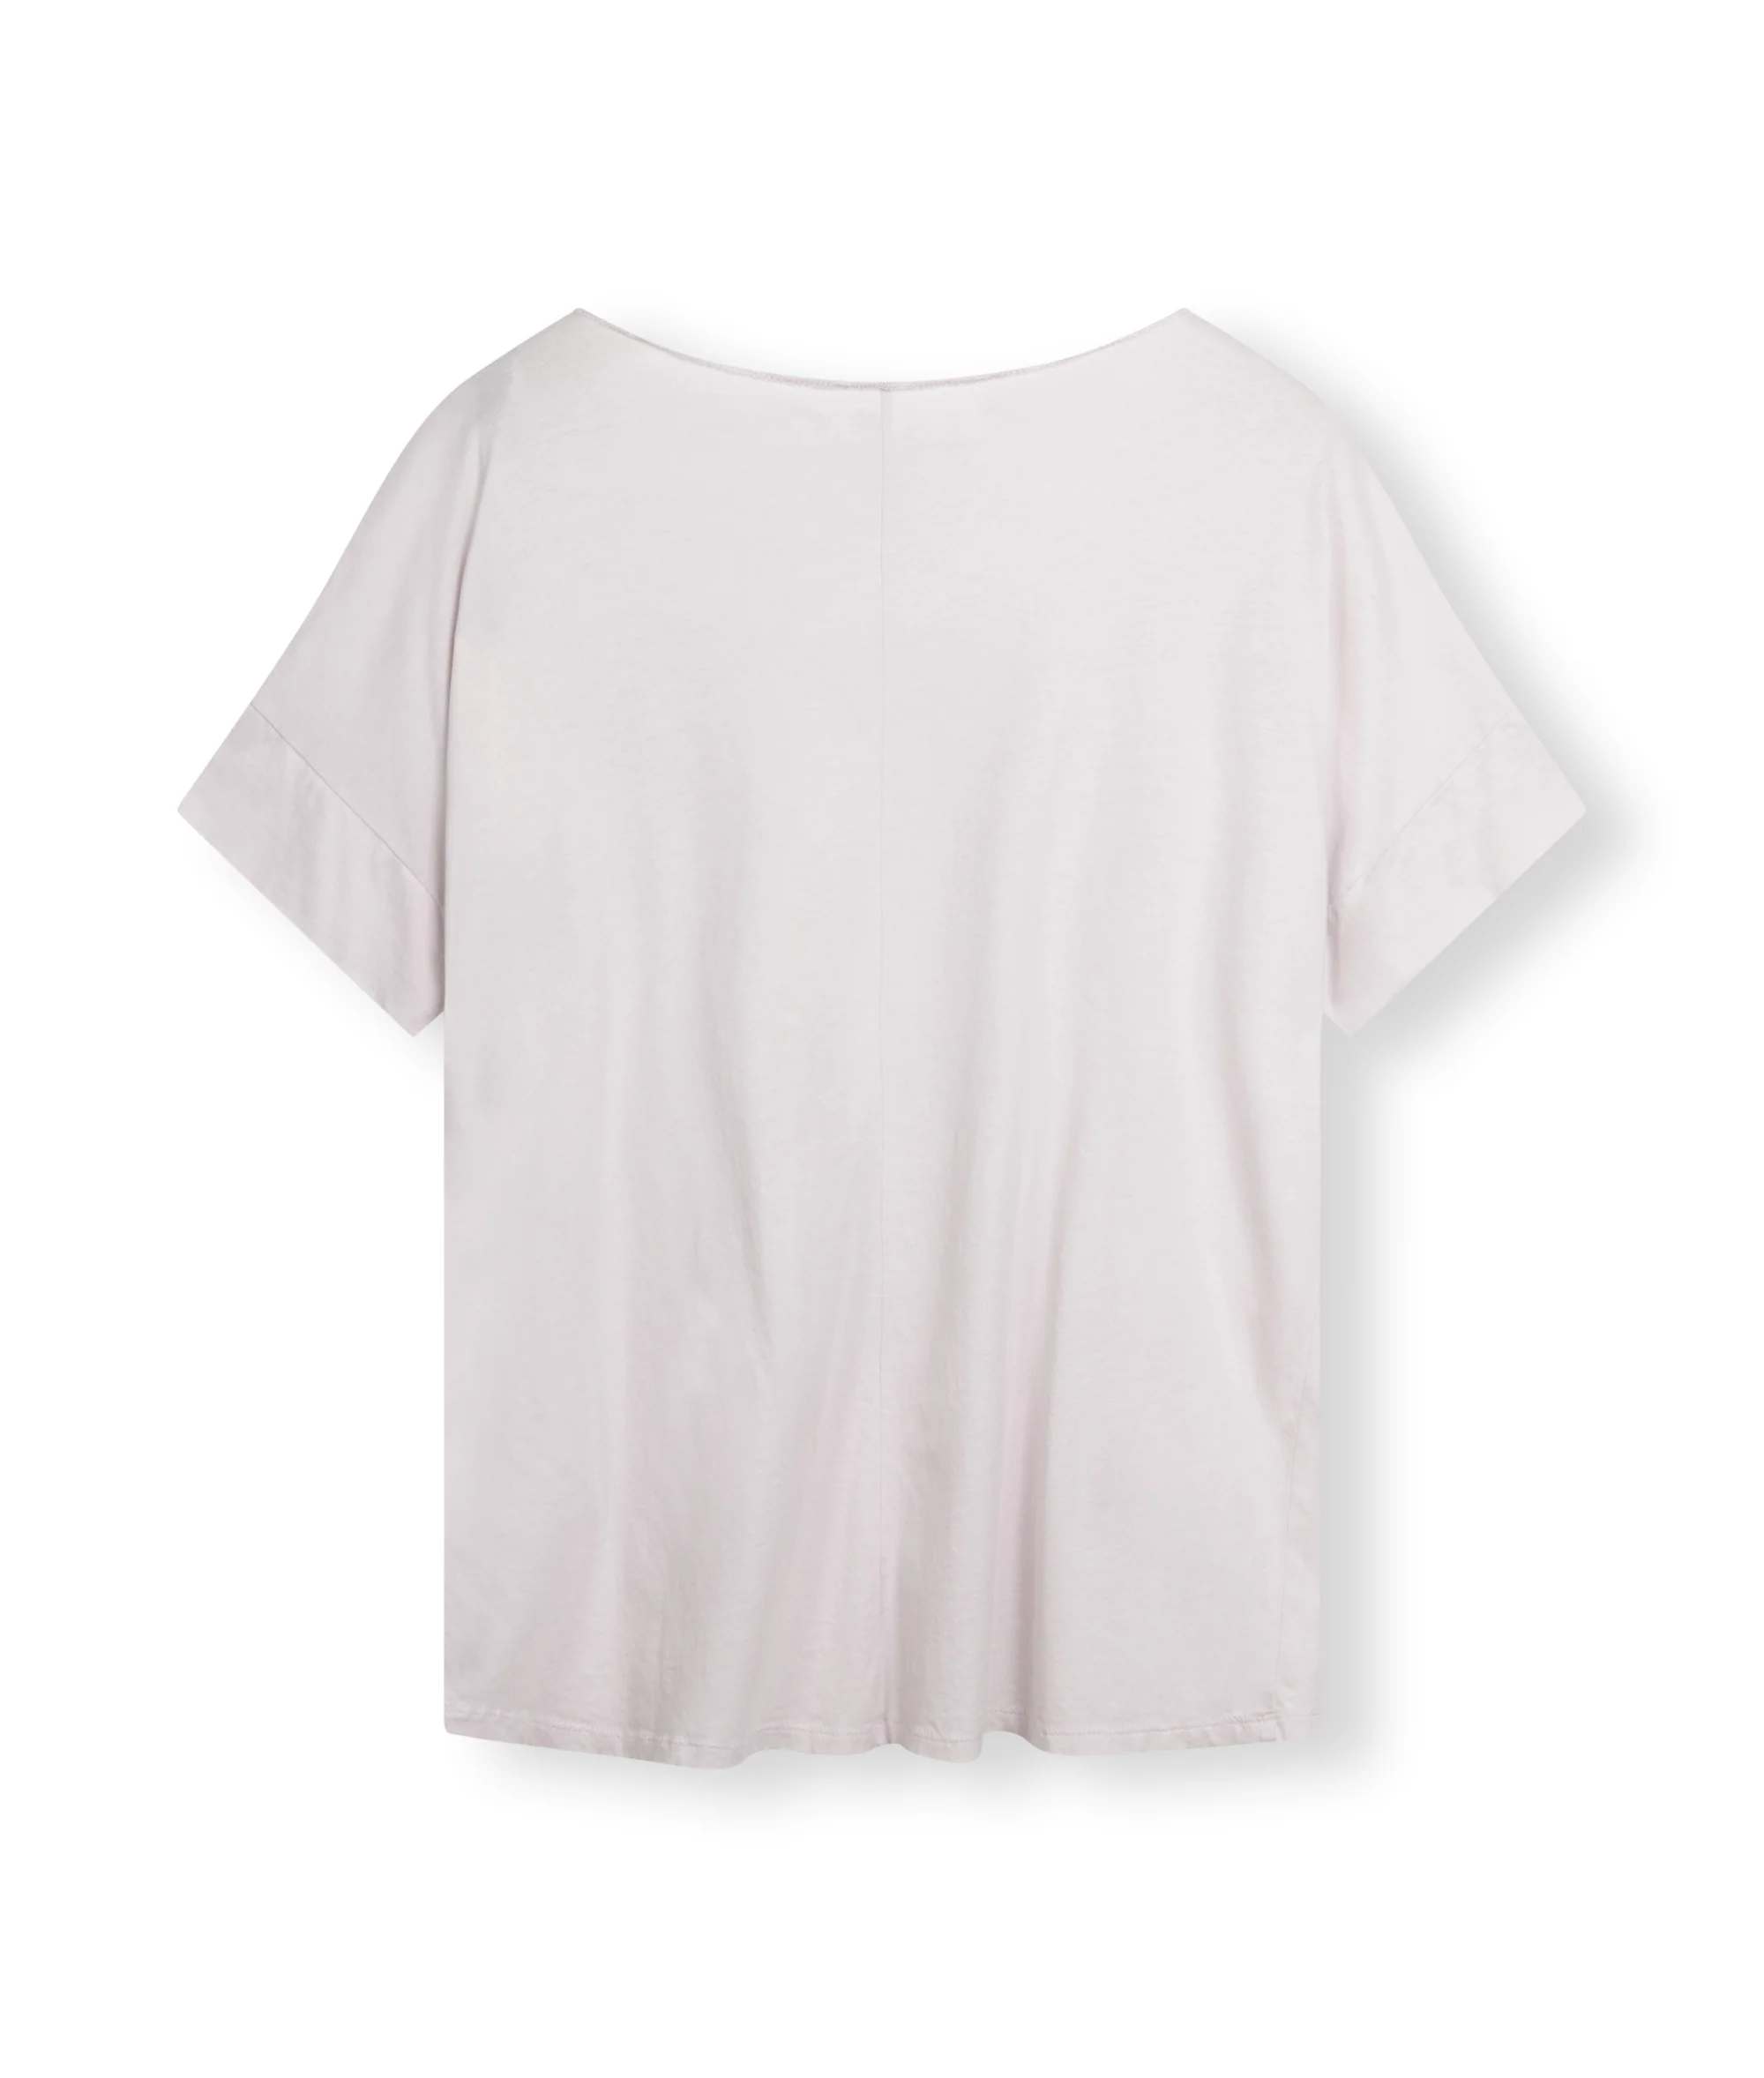 10DAYS 20-760-3203 Statement Tee Pale Lilac